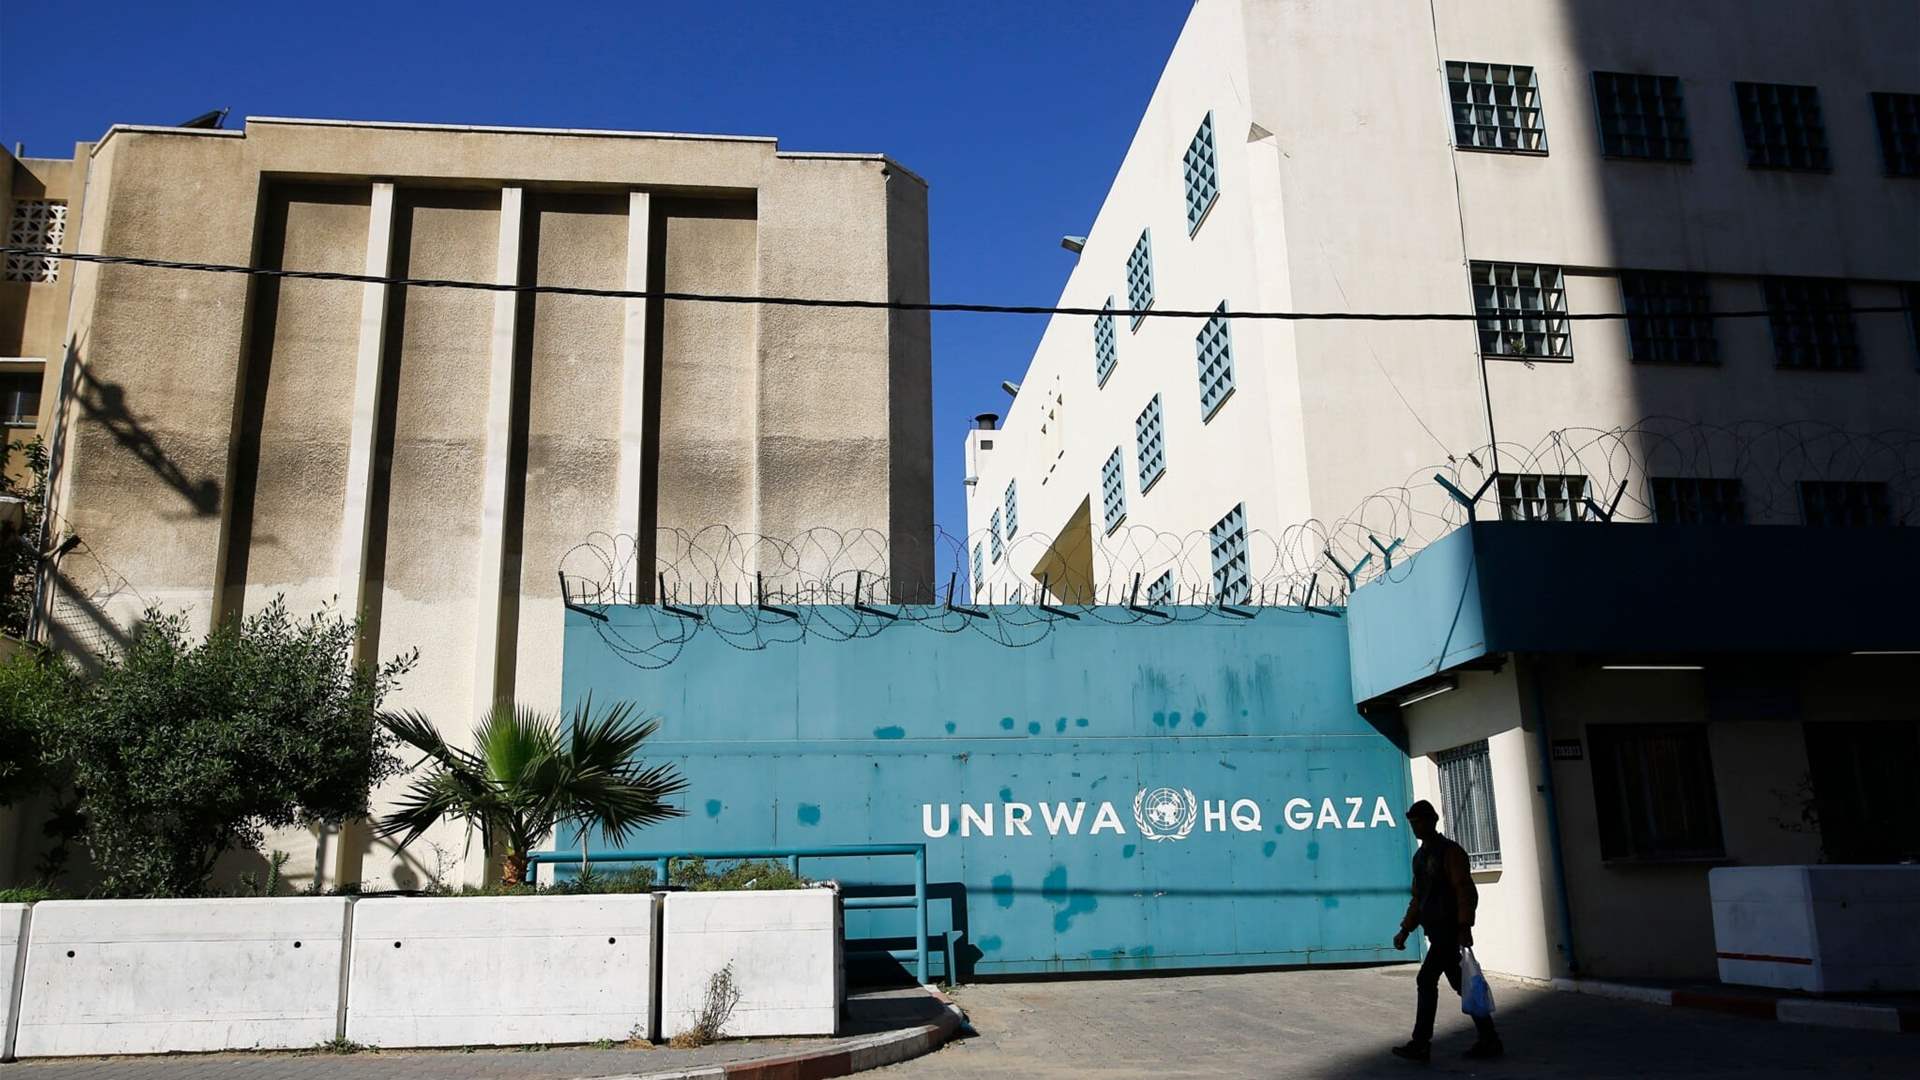 UNRWA: We will not be able to assist Gaza after February due to funding suspension 